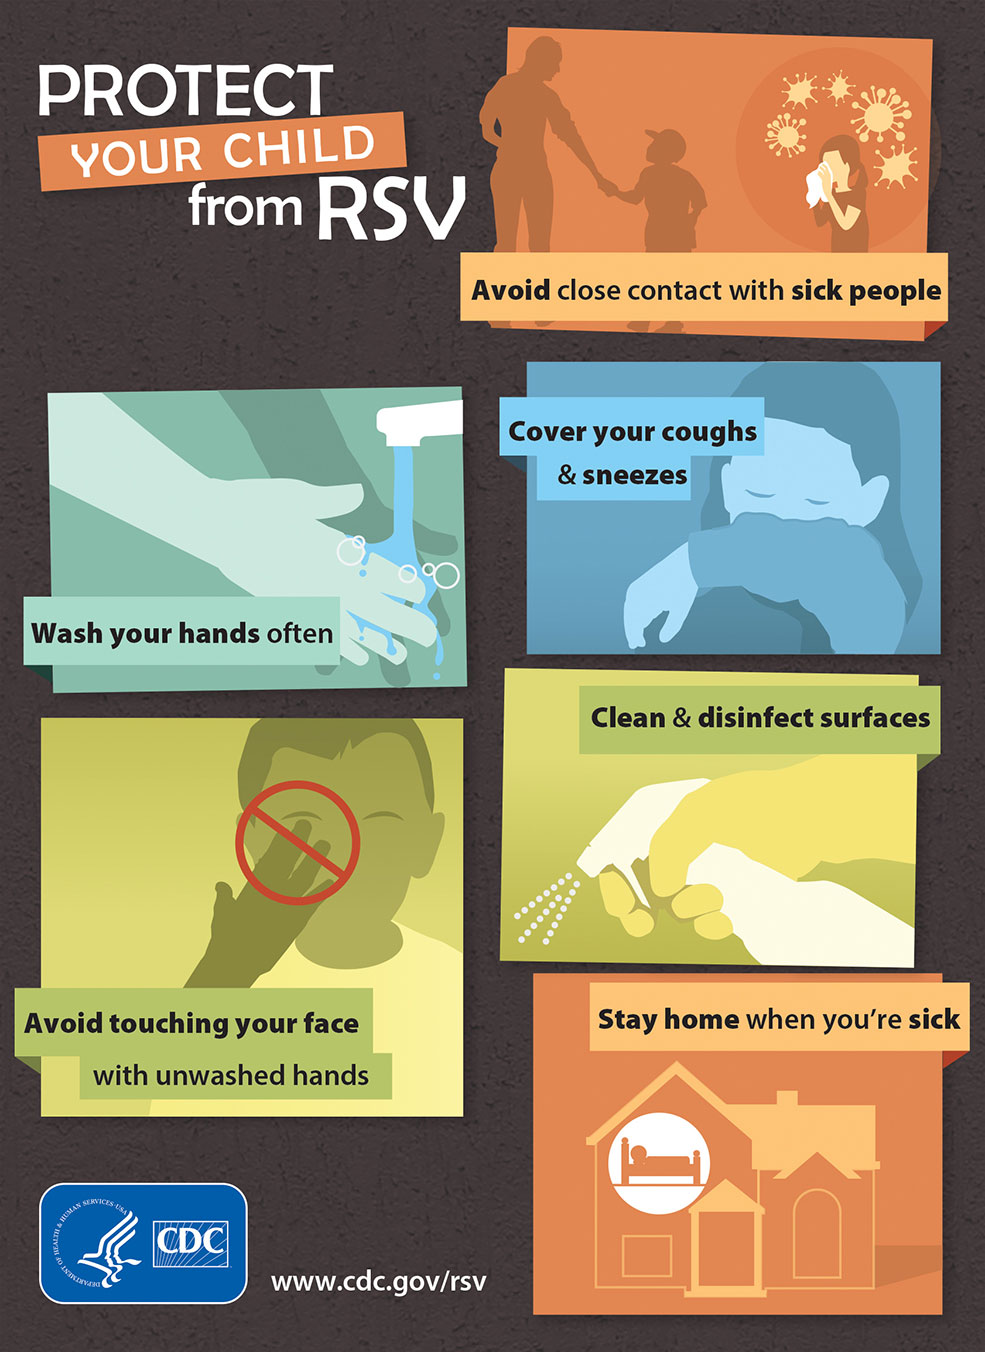 Protect Your Child from RSV Infographic | CDC